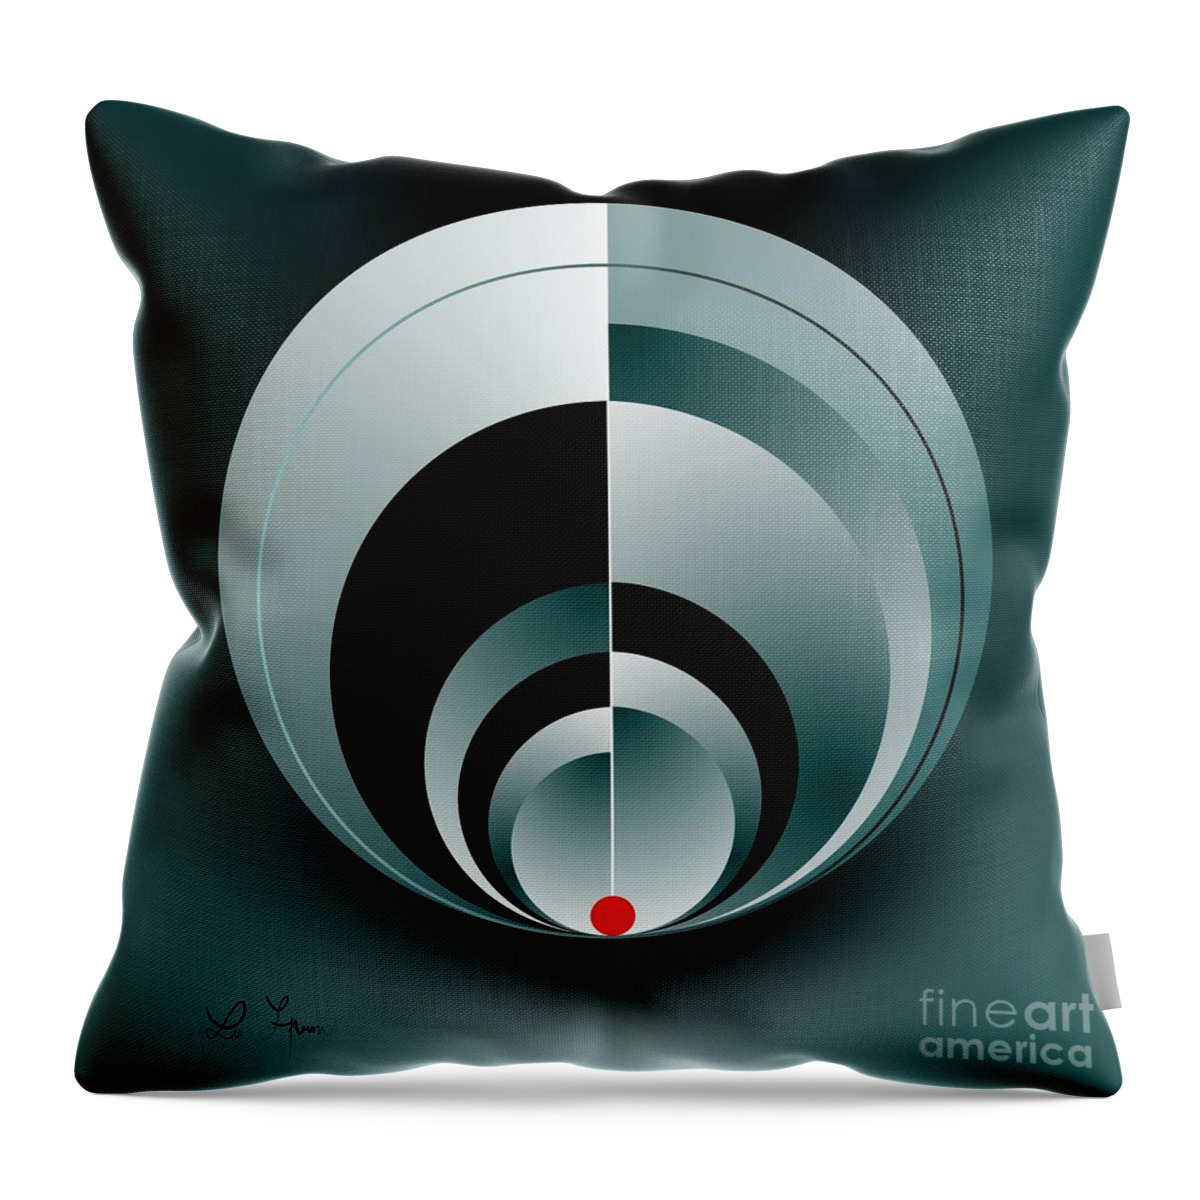  Throw Pillow featuring the digital art You Are Here by Leo Symon